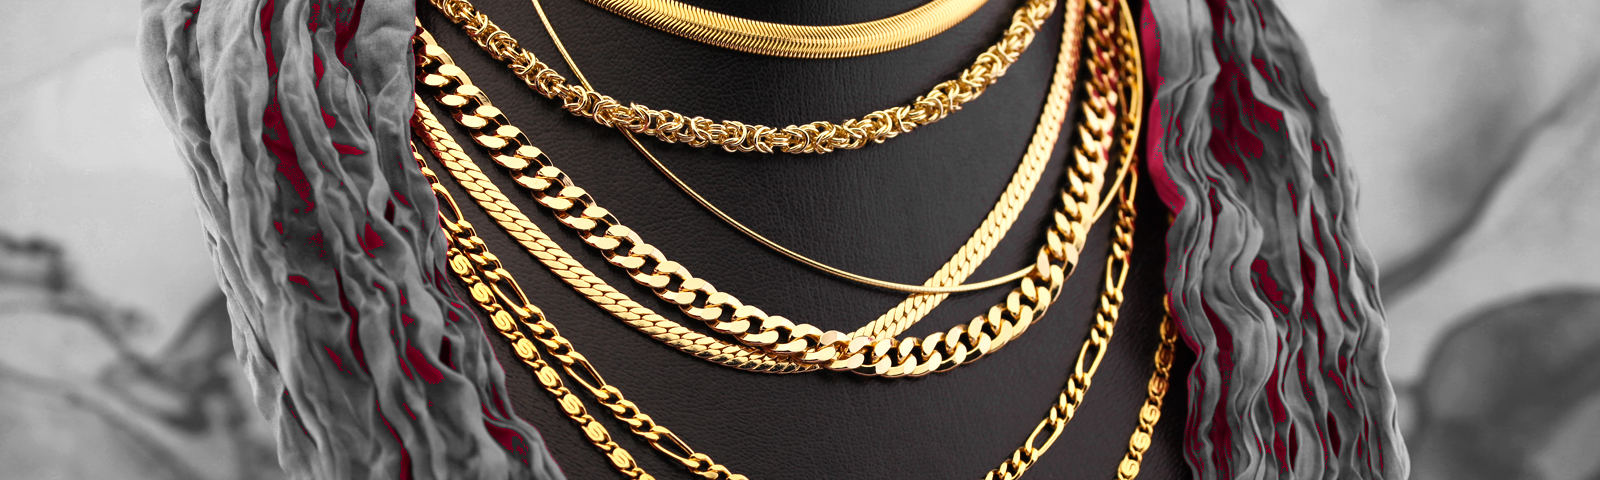 Gold chains on neck